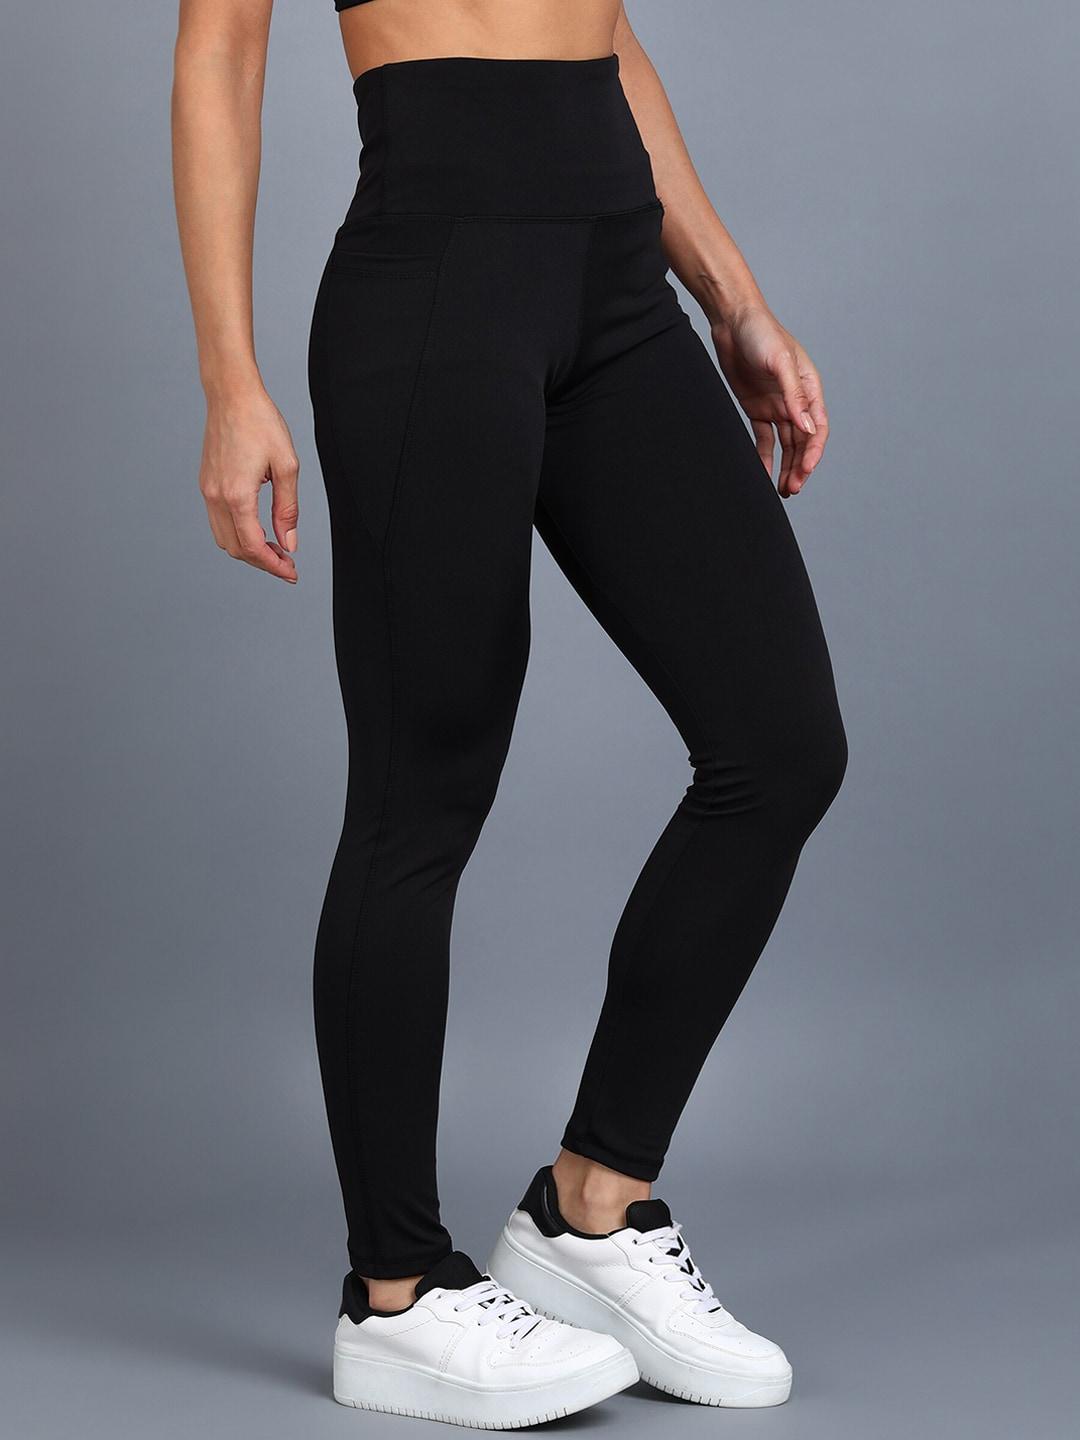 rock-paper-scissors-women-black-solid-ankle-length-training-tights